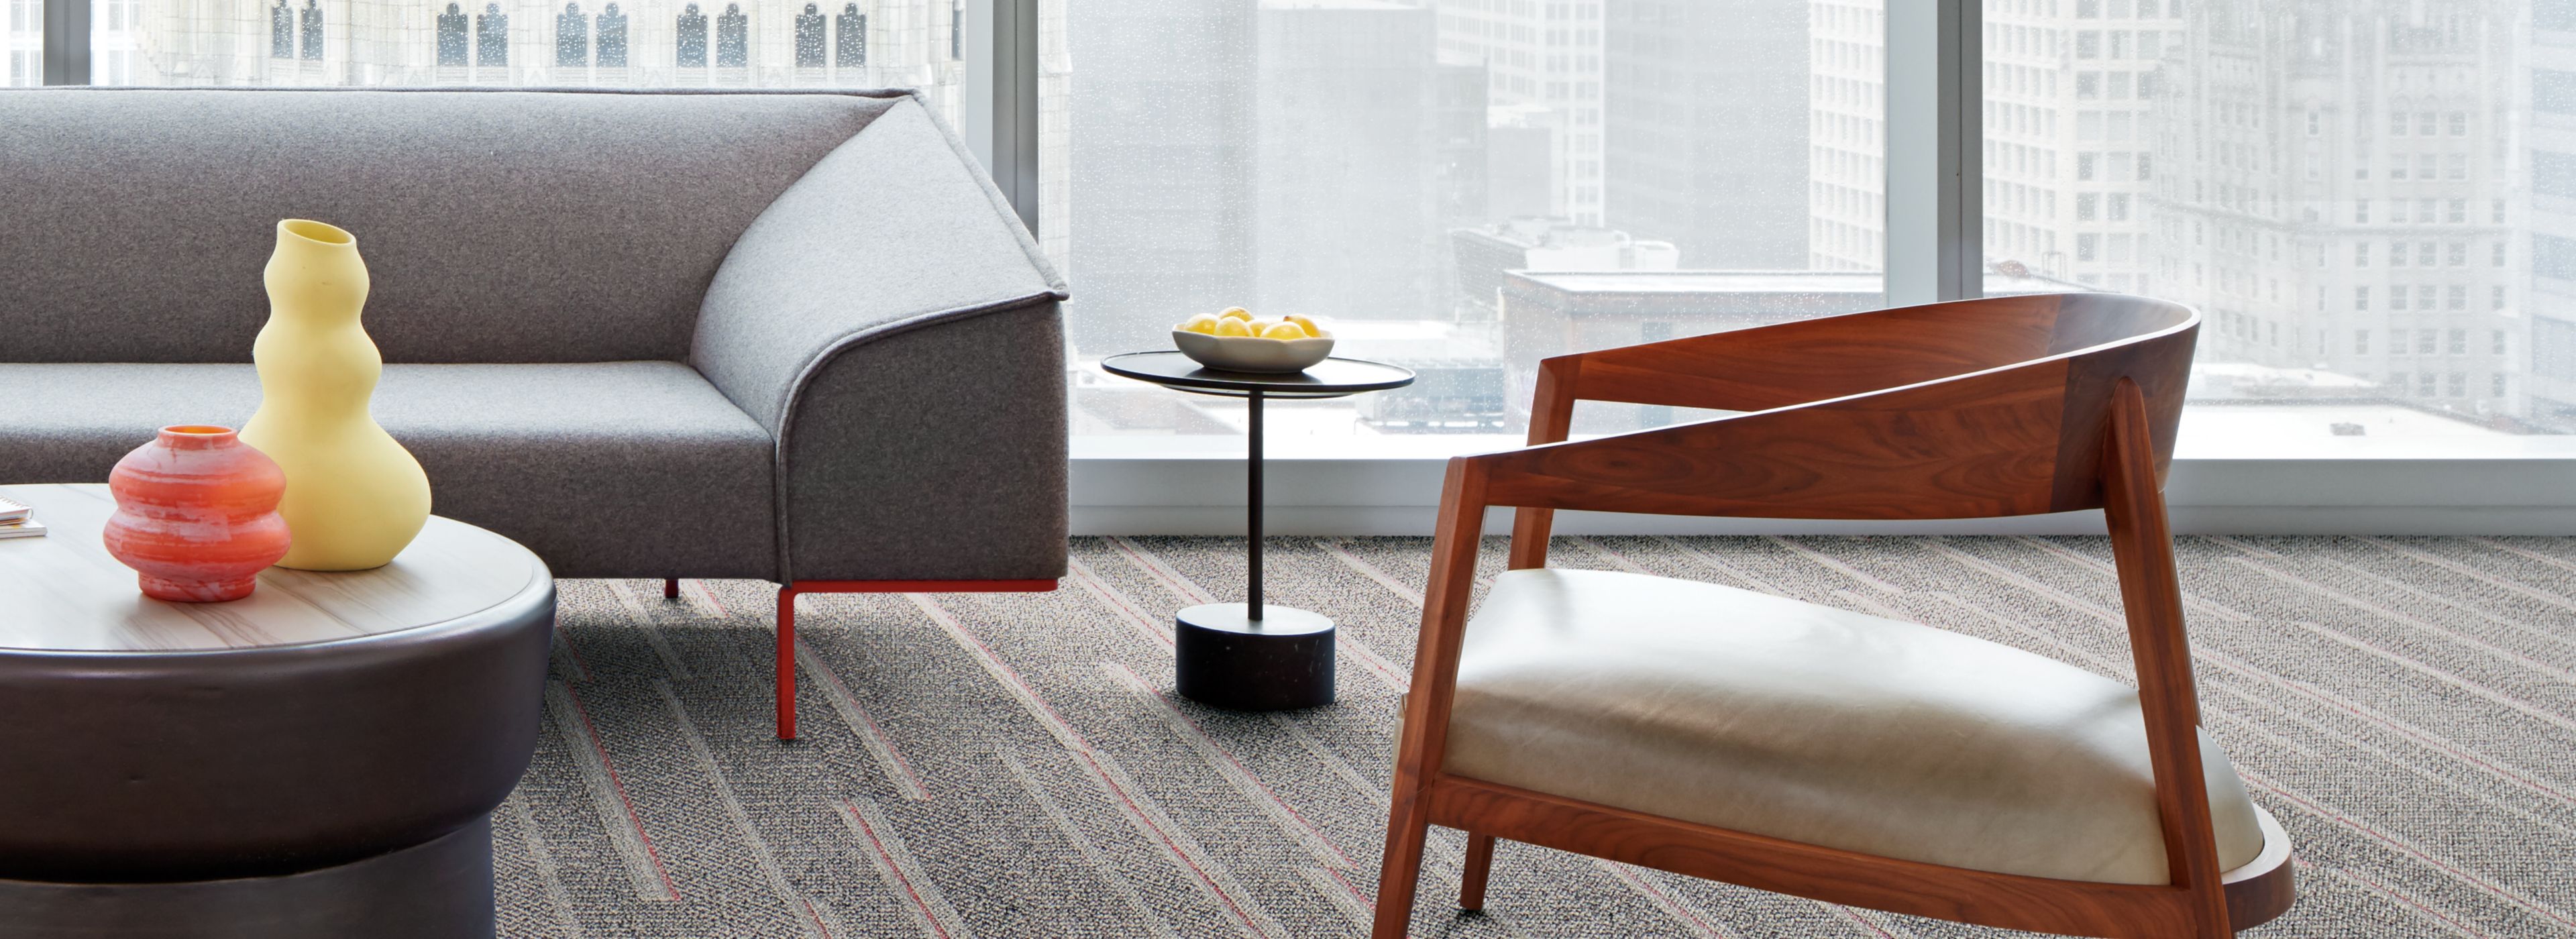 image Interface Simple Sash plank carpet tile in common are with chairs numéro 1